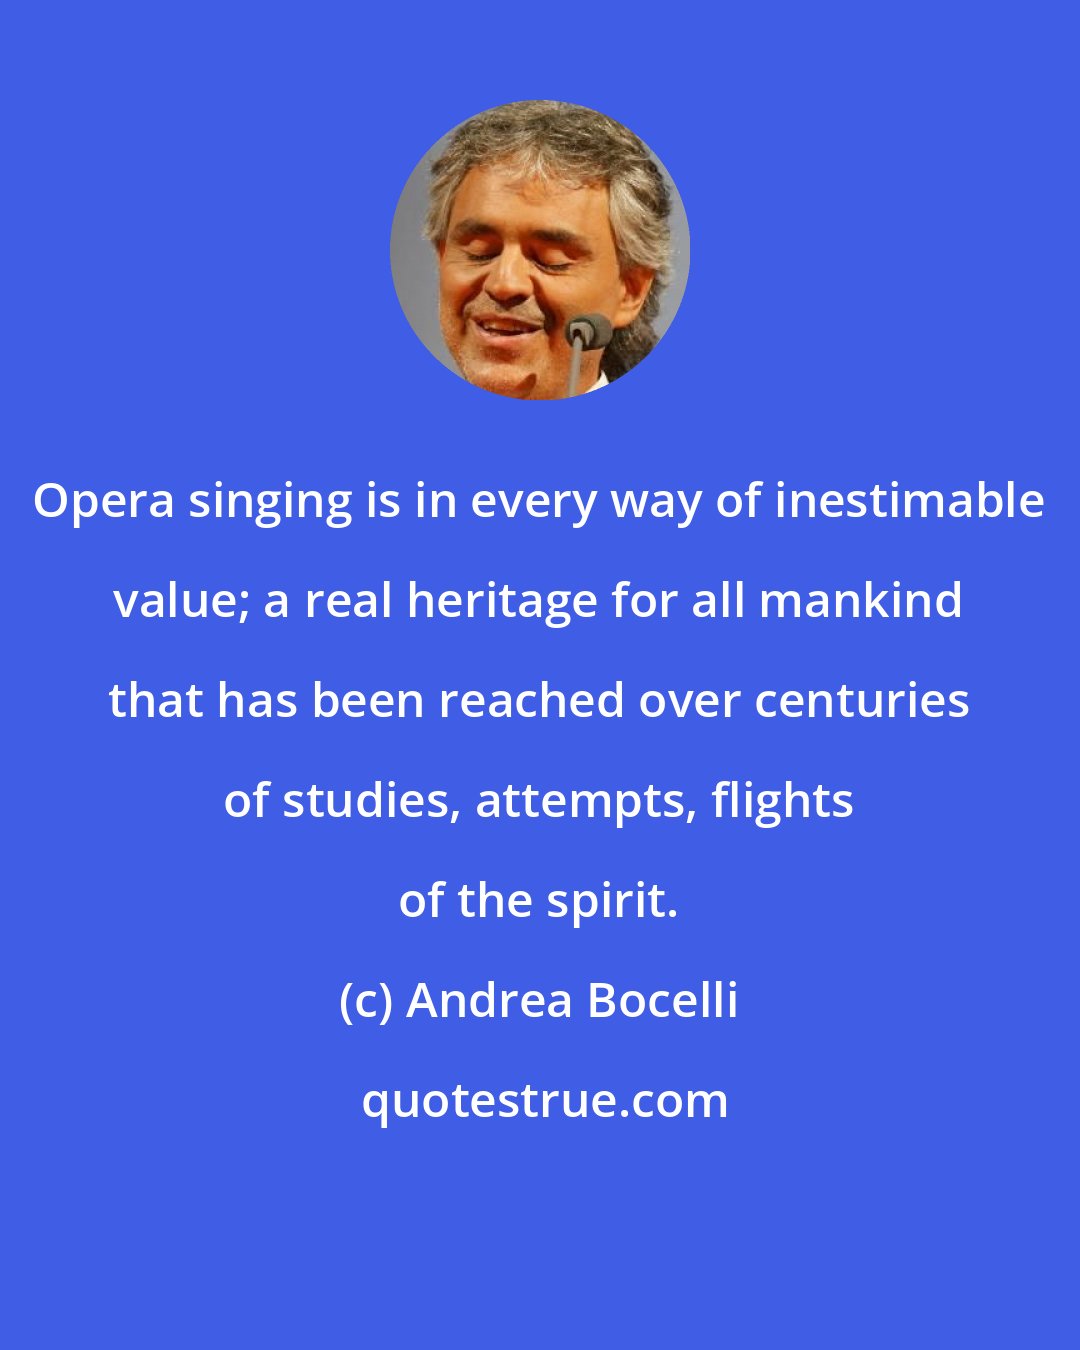 Andrea Bocelli: Opera singing is in every way of inestimable value; a real heritage for all mankind that has been reached over centuries of studies, attempts, flights of the spirit.